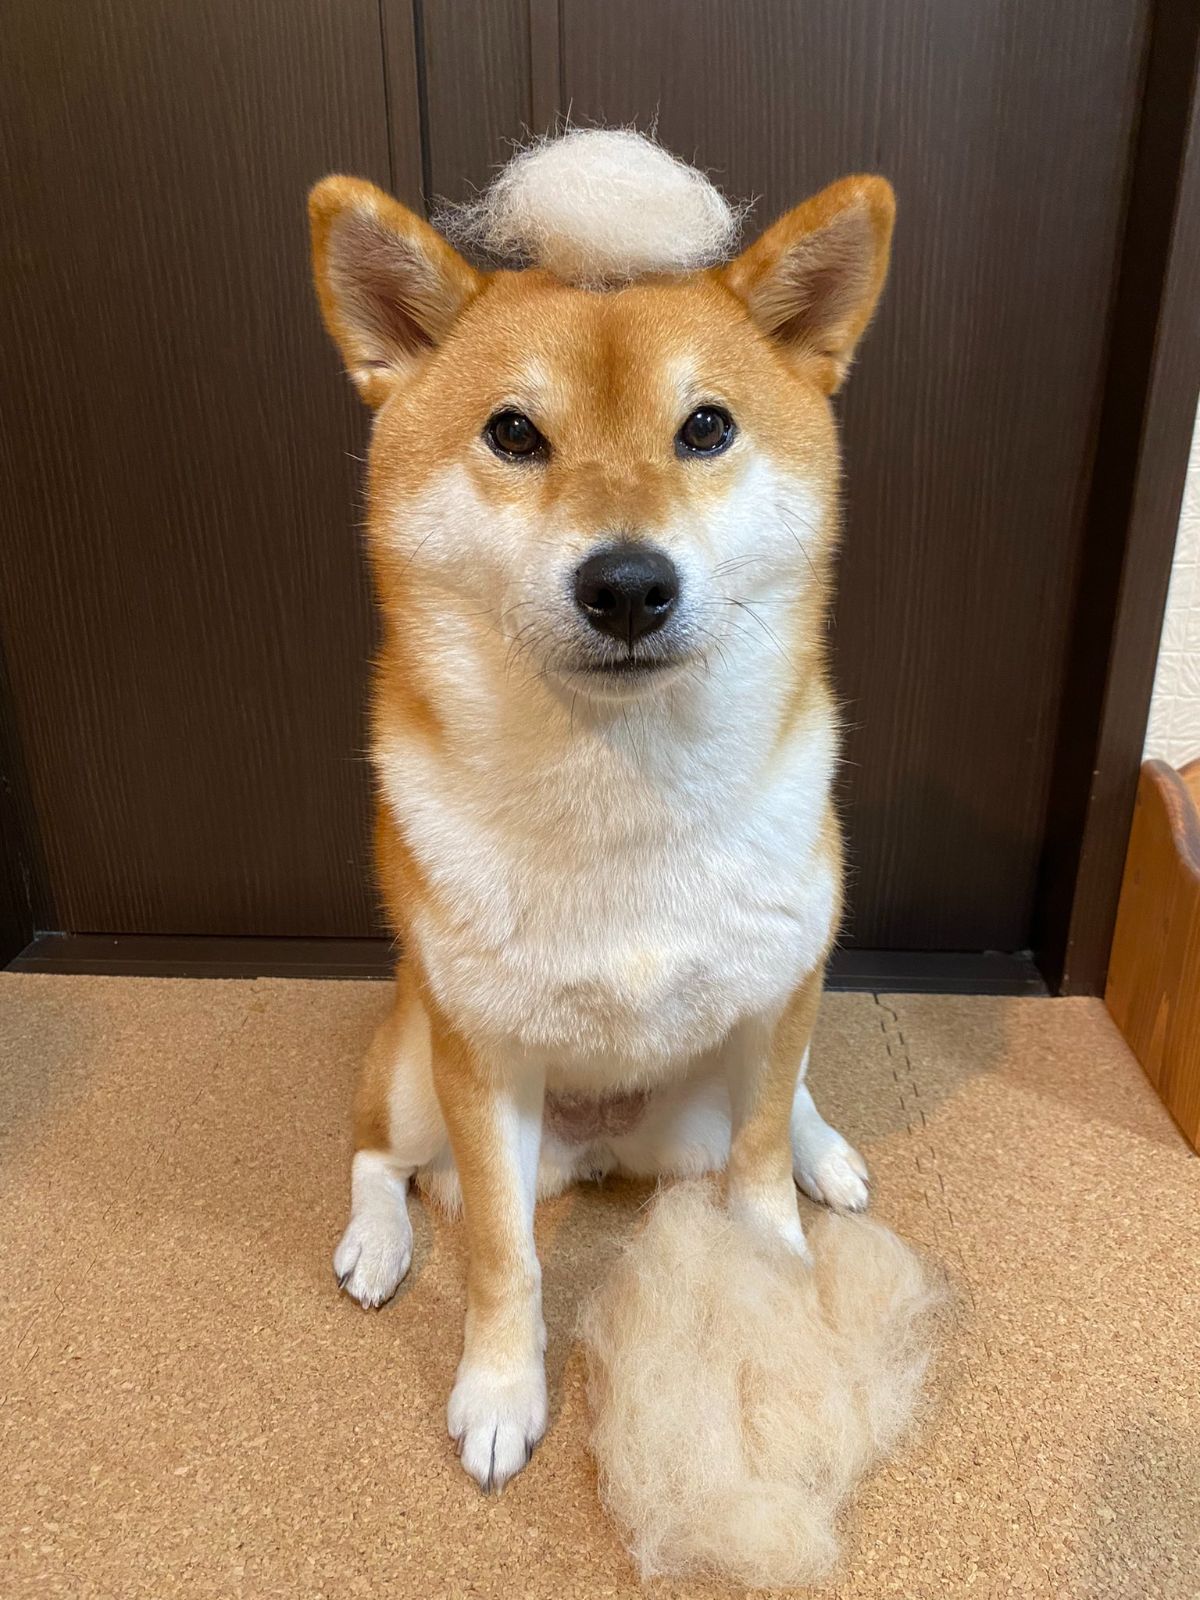 brown and white shiba inu sitting on floor with some white fur in a ball on the head and some more fur on the floor by the foot